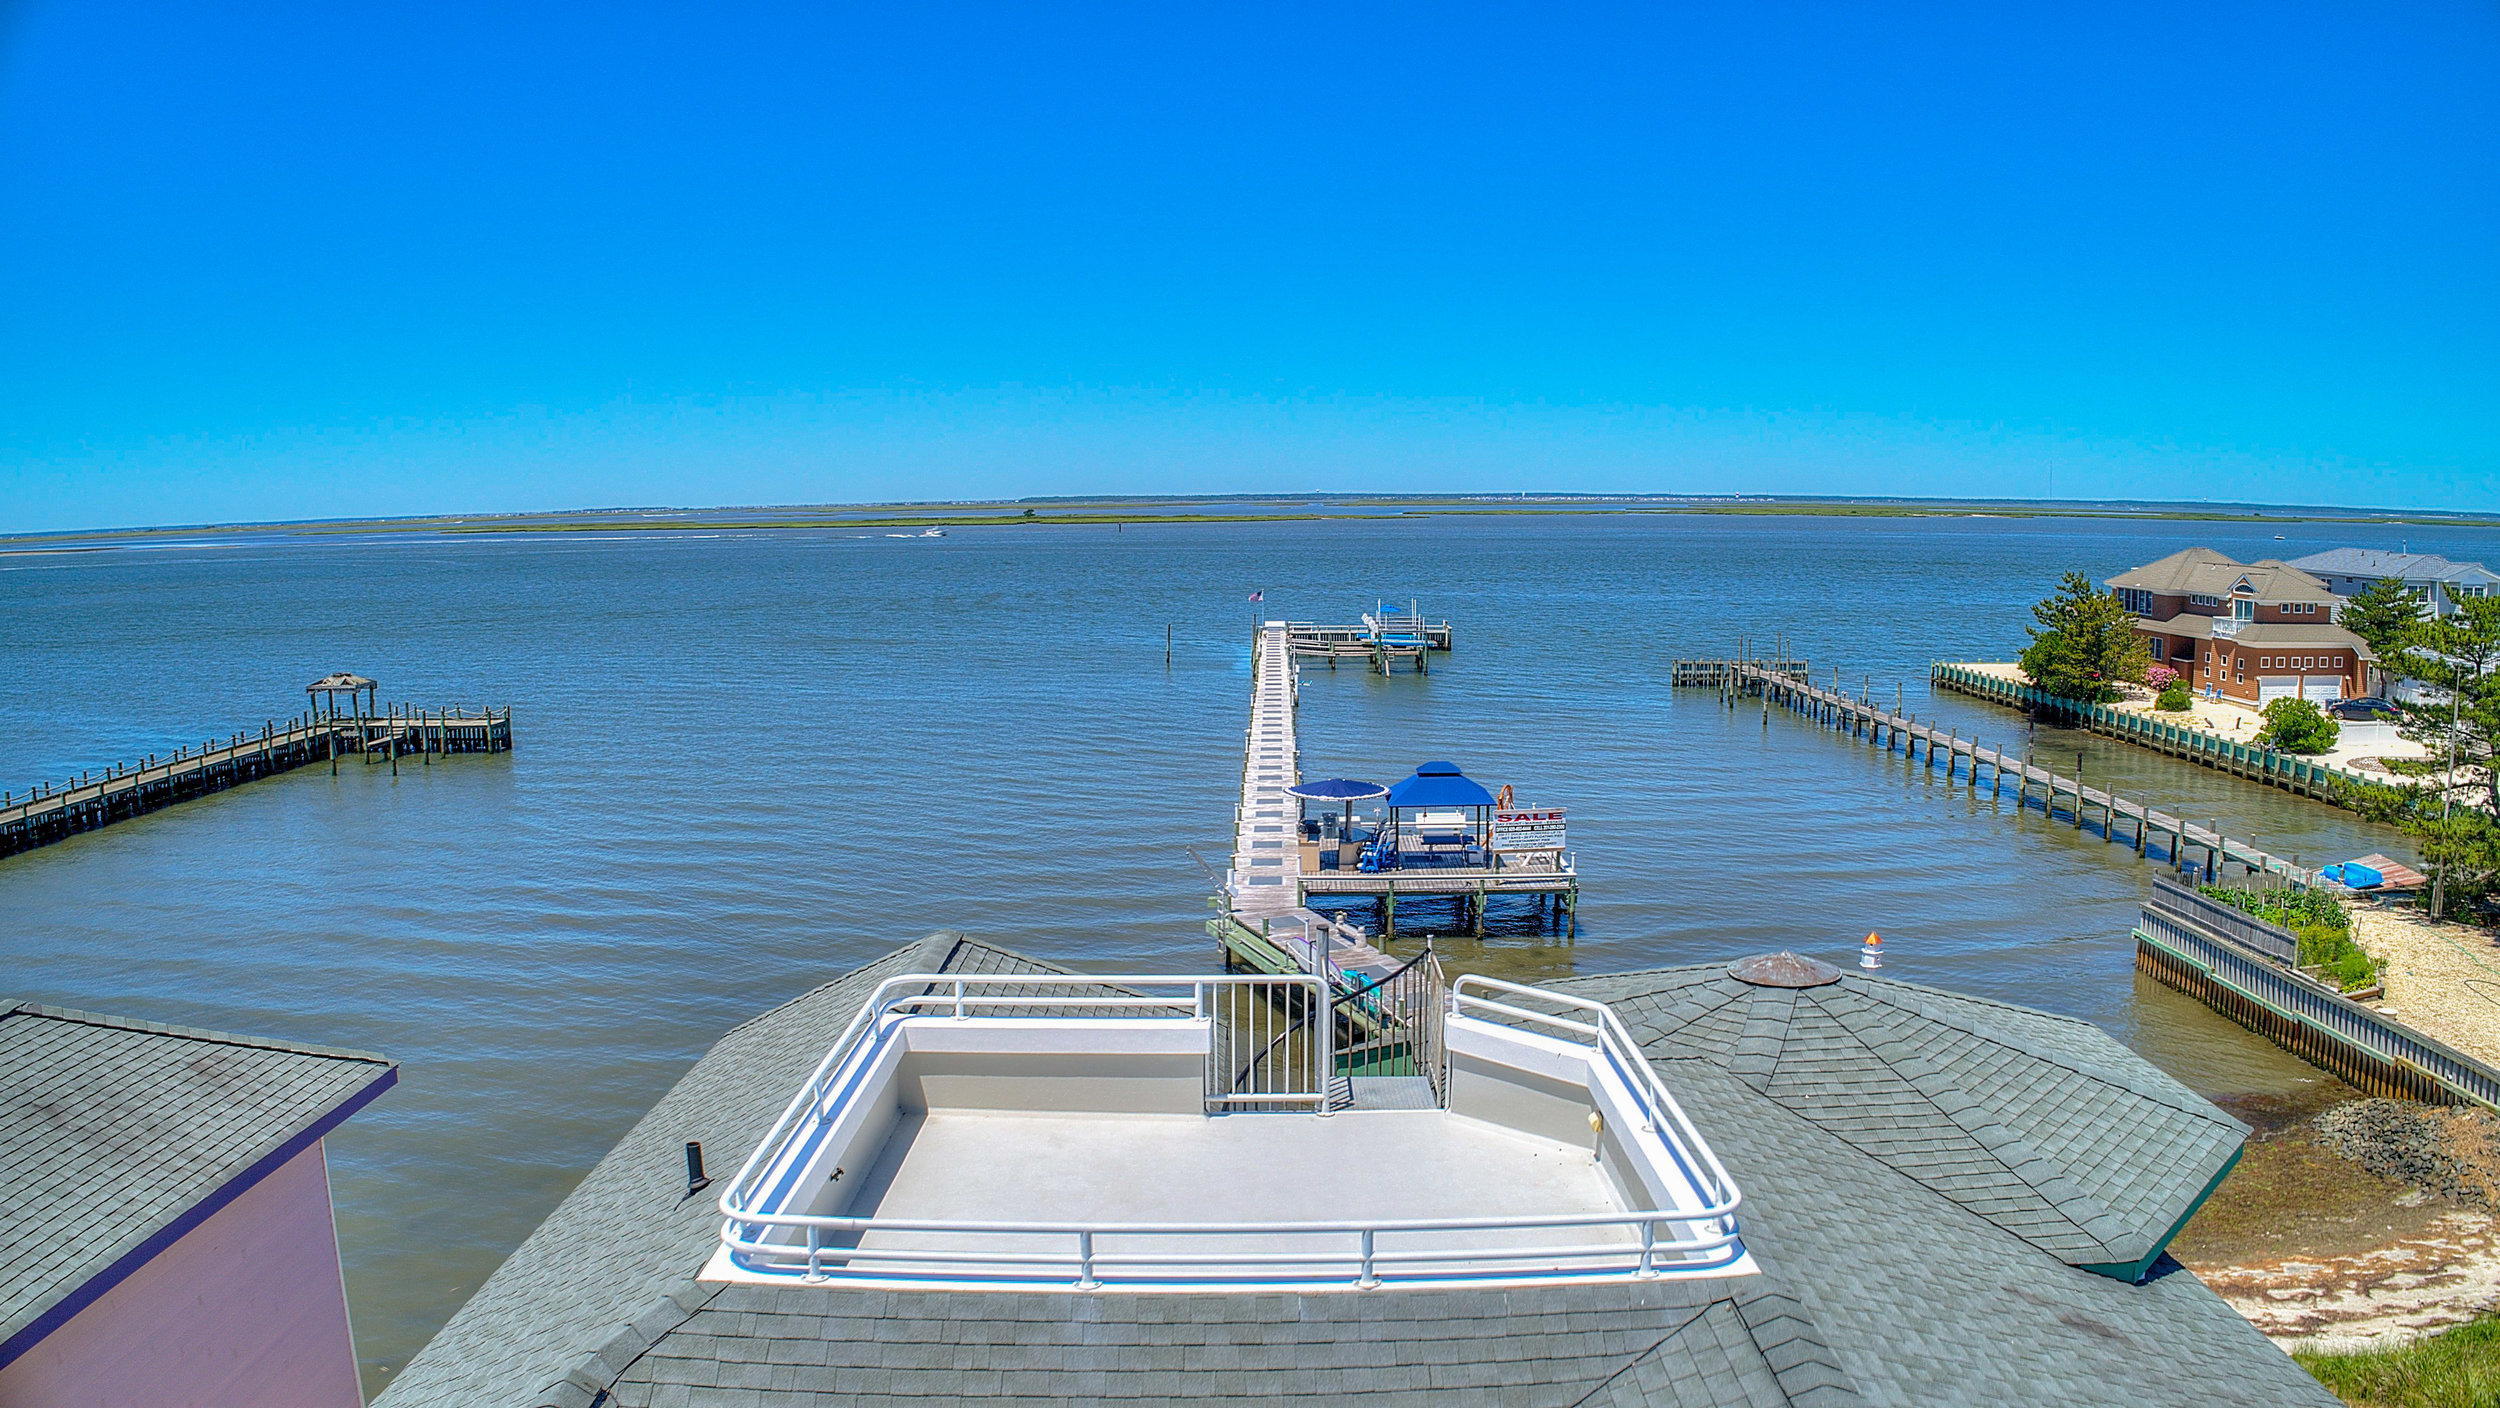 Roof Top Deck view Barnegat Bay Long Beach Island New Jersey Drone Photography